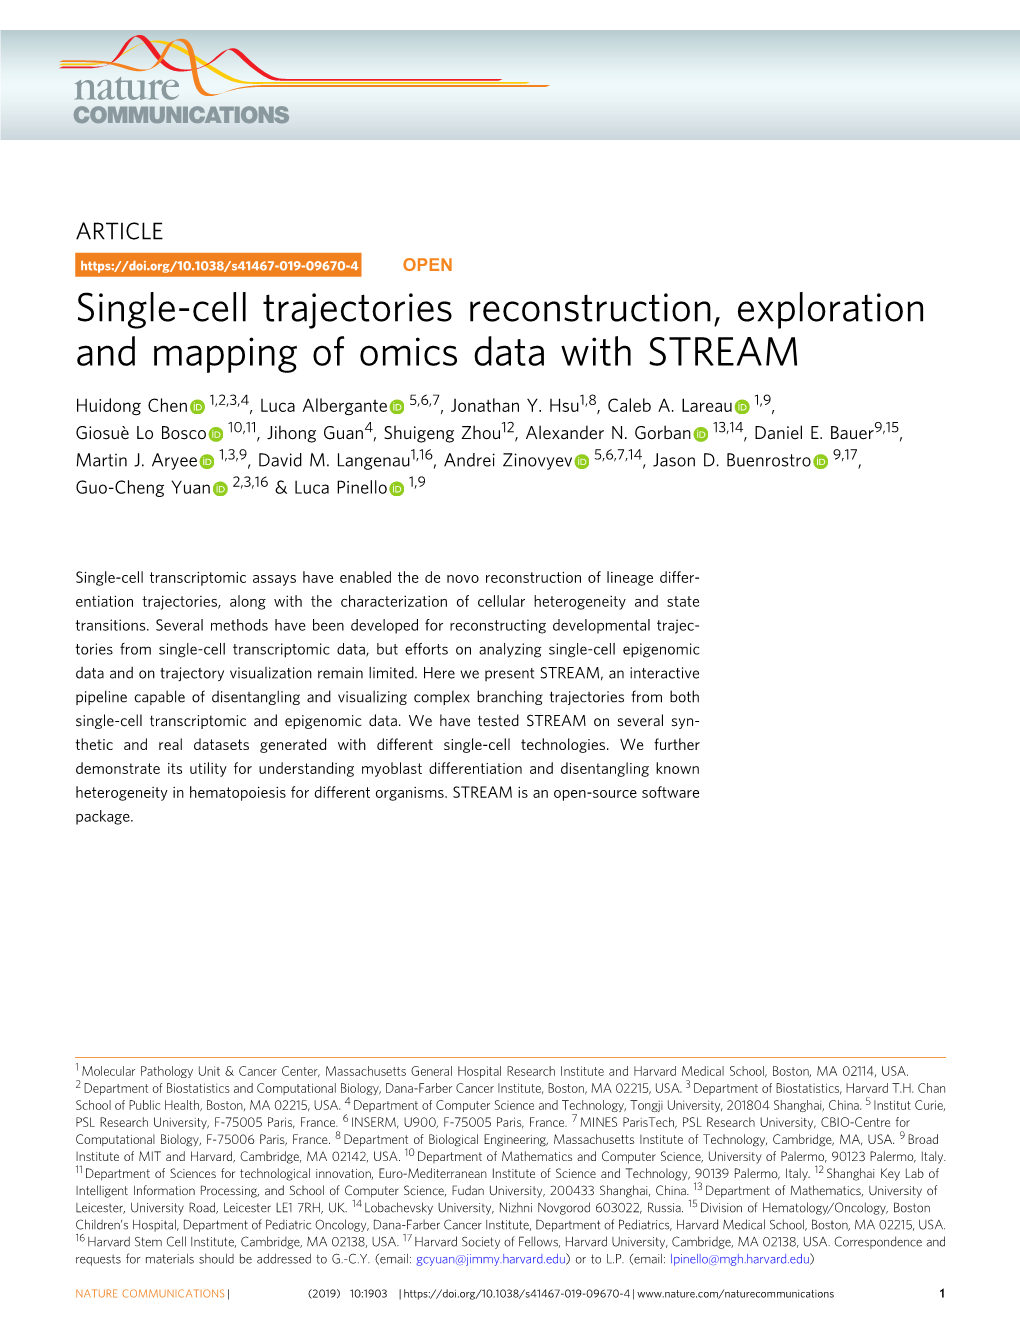 Single-Cell Trajectories Reconstruction, Exploration and Mapping of Omics Data with STREAM